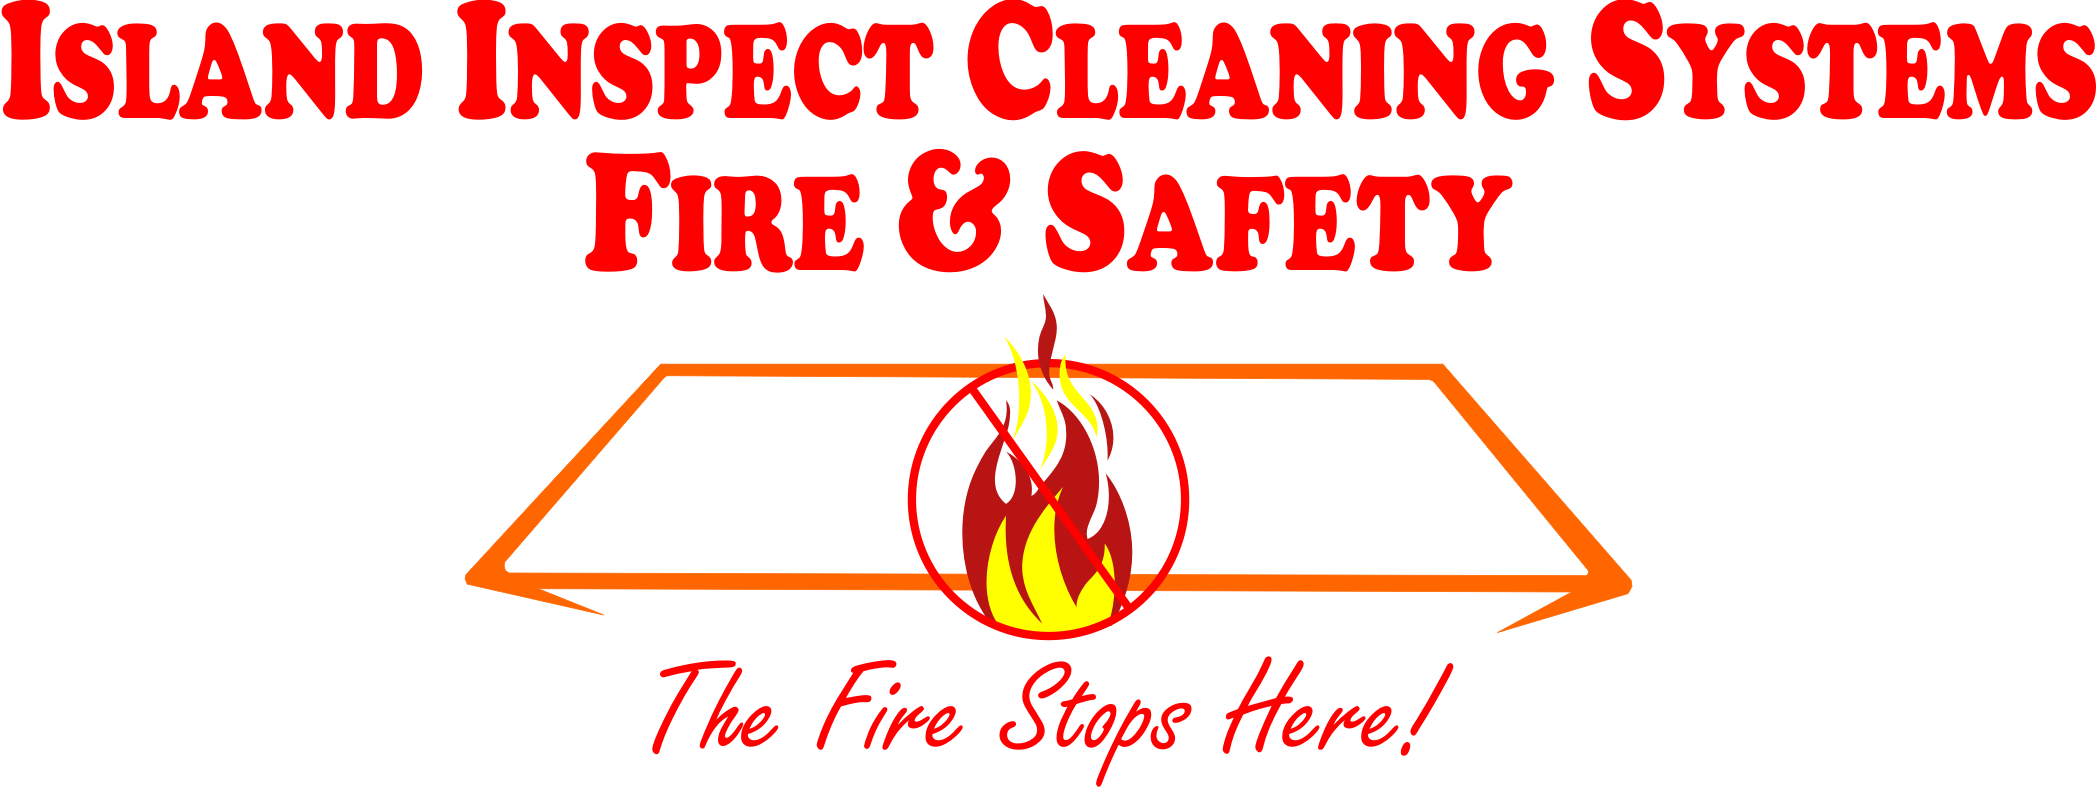 ISLAND INSPECT CLEANING SYSTEMS FIRE & SAFTEY